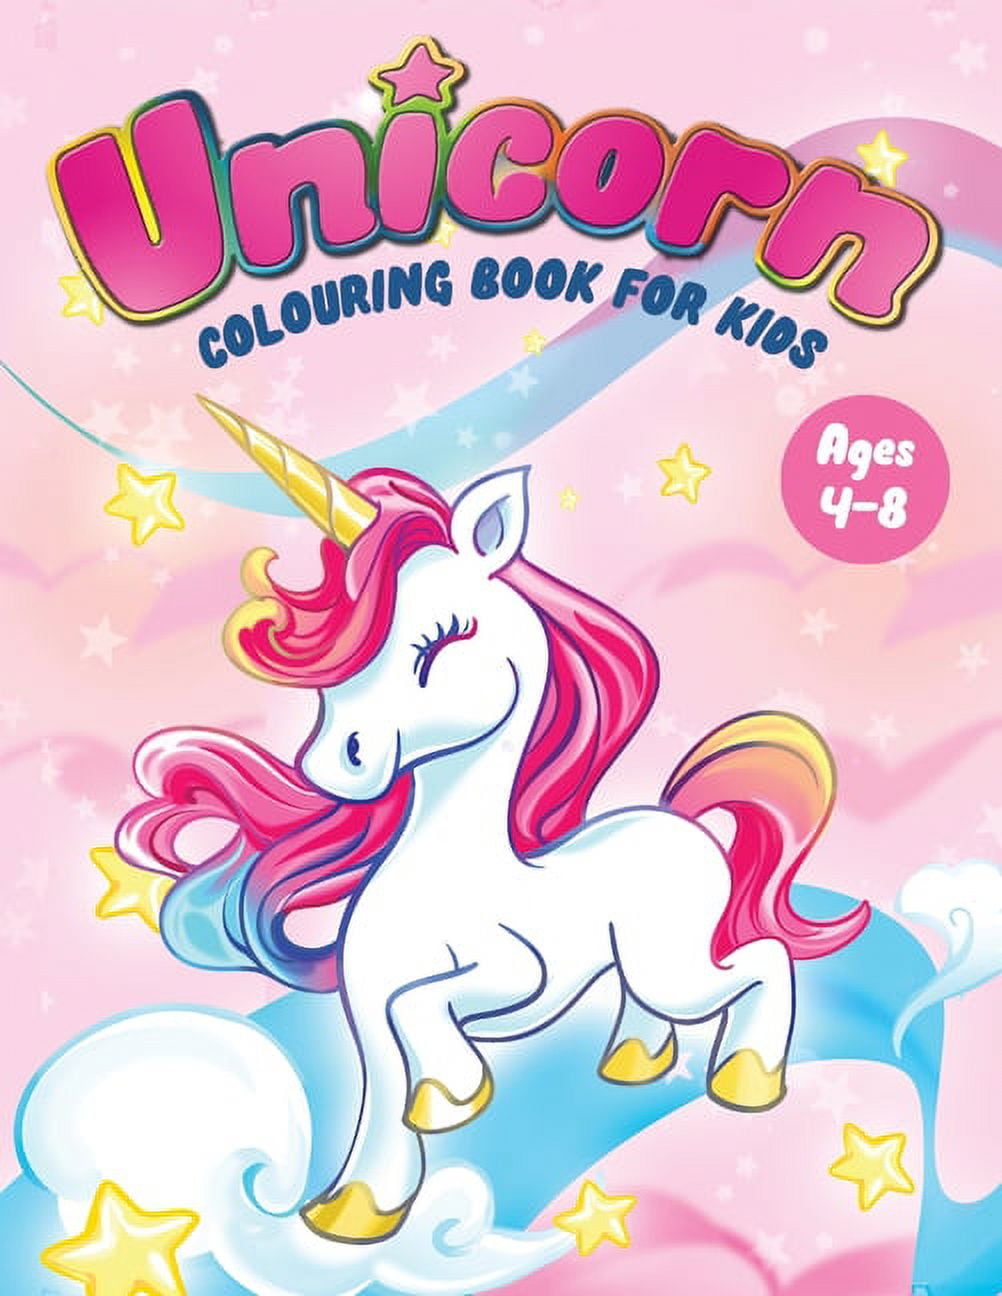 unicorn coloring book for kids ages 4-8: (The Future Teacher's